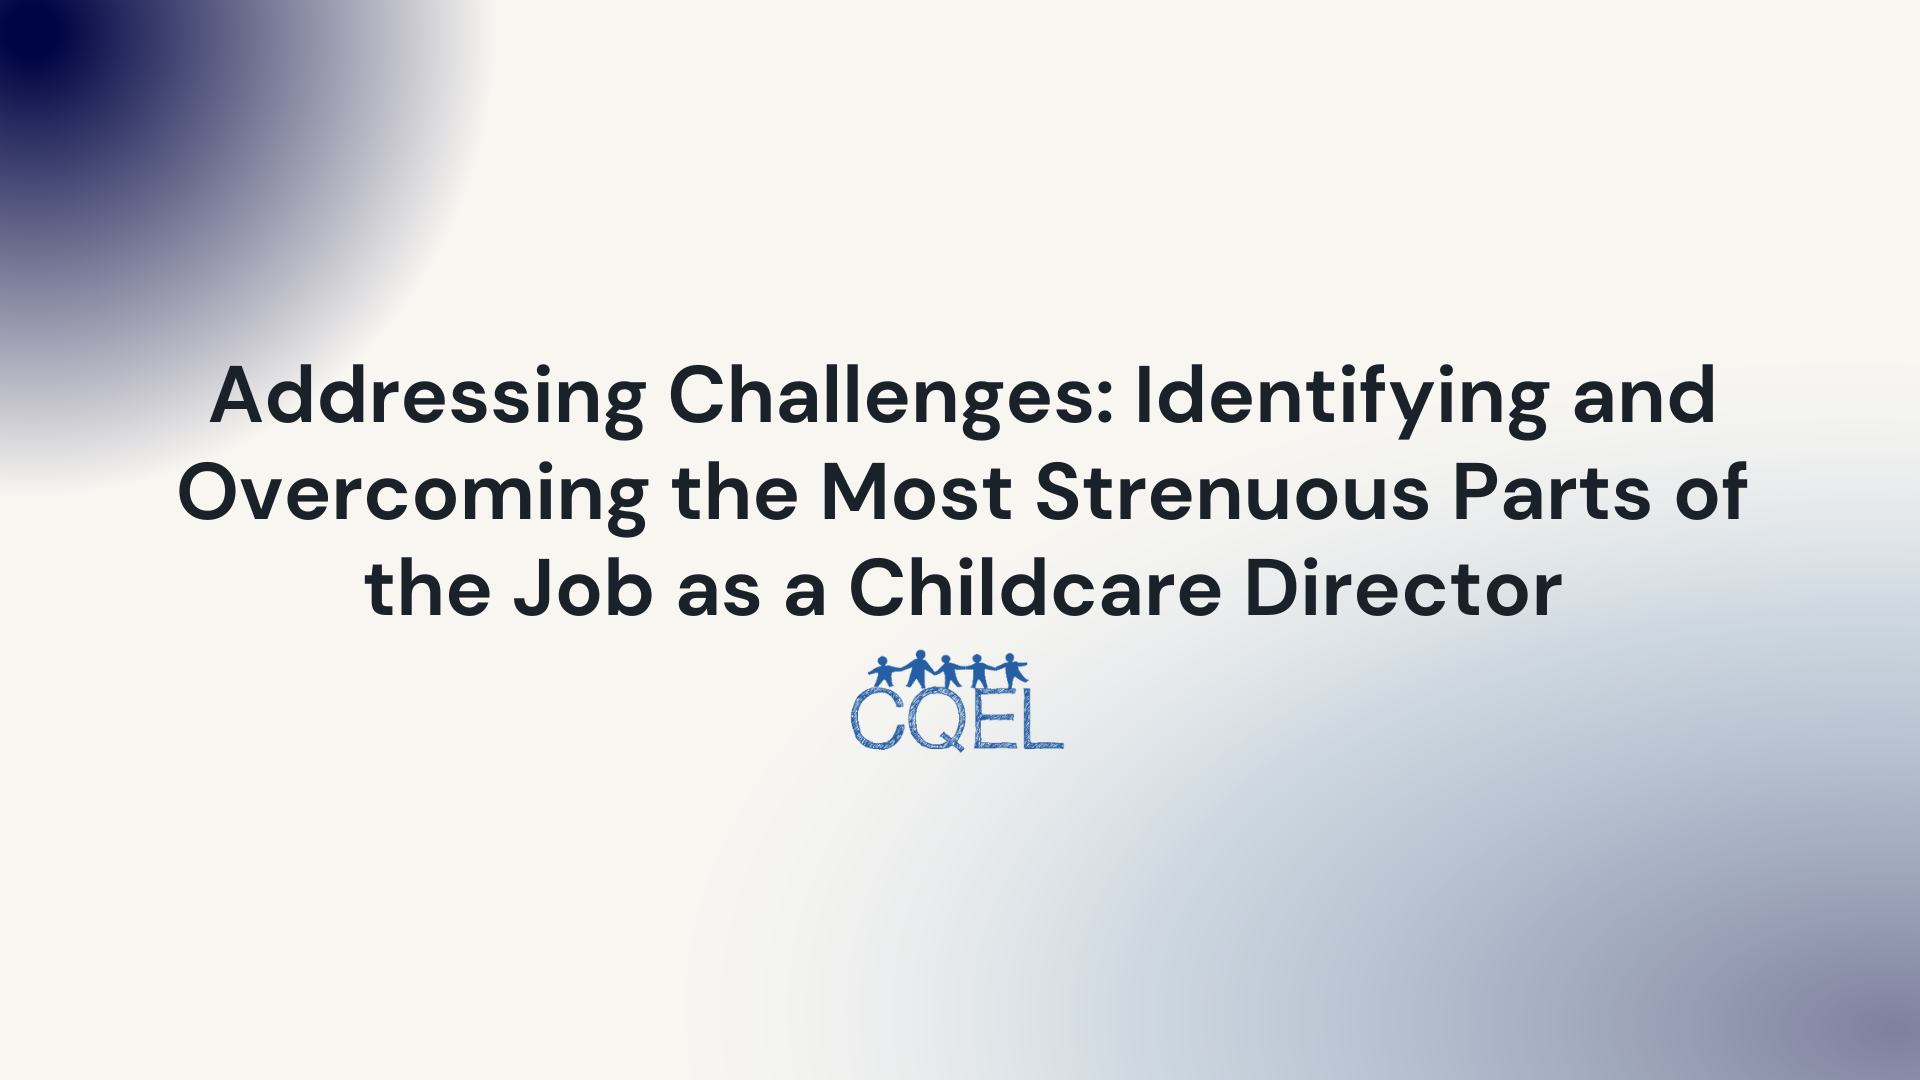 Addressing Challenges: Identifying and Overcoming the Most Strenuous Parts of the Job as a Childcare Director